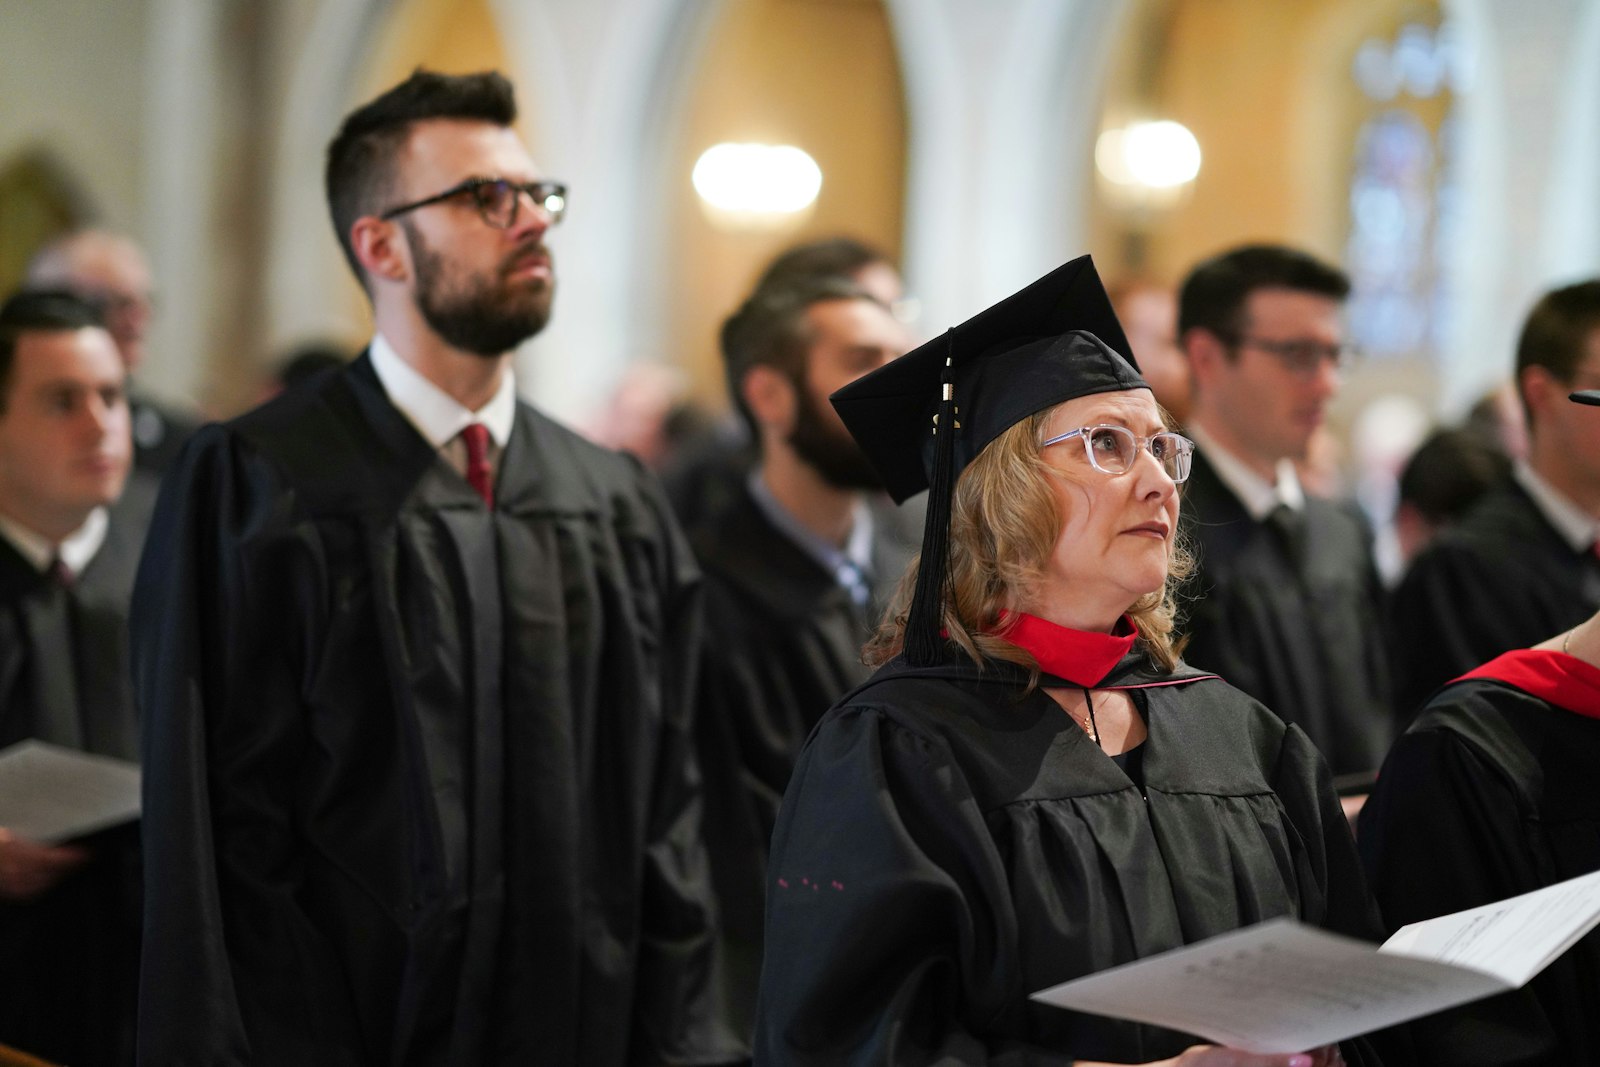 Many Sacred Heart graduates go on to use their degrees in parish or ministry work, bringing their newfound knowledge to bear in a society that needs to hear the good news of Jesus, said Fr. Stephen Burr, rector and president of Sacred Heart.